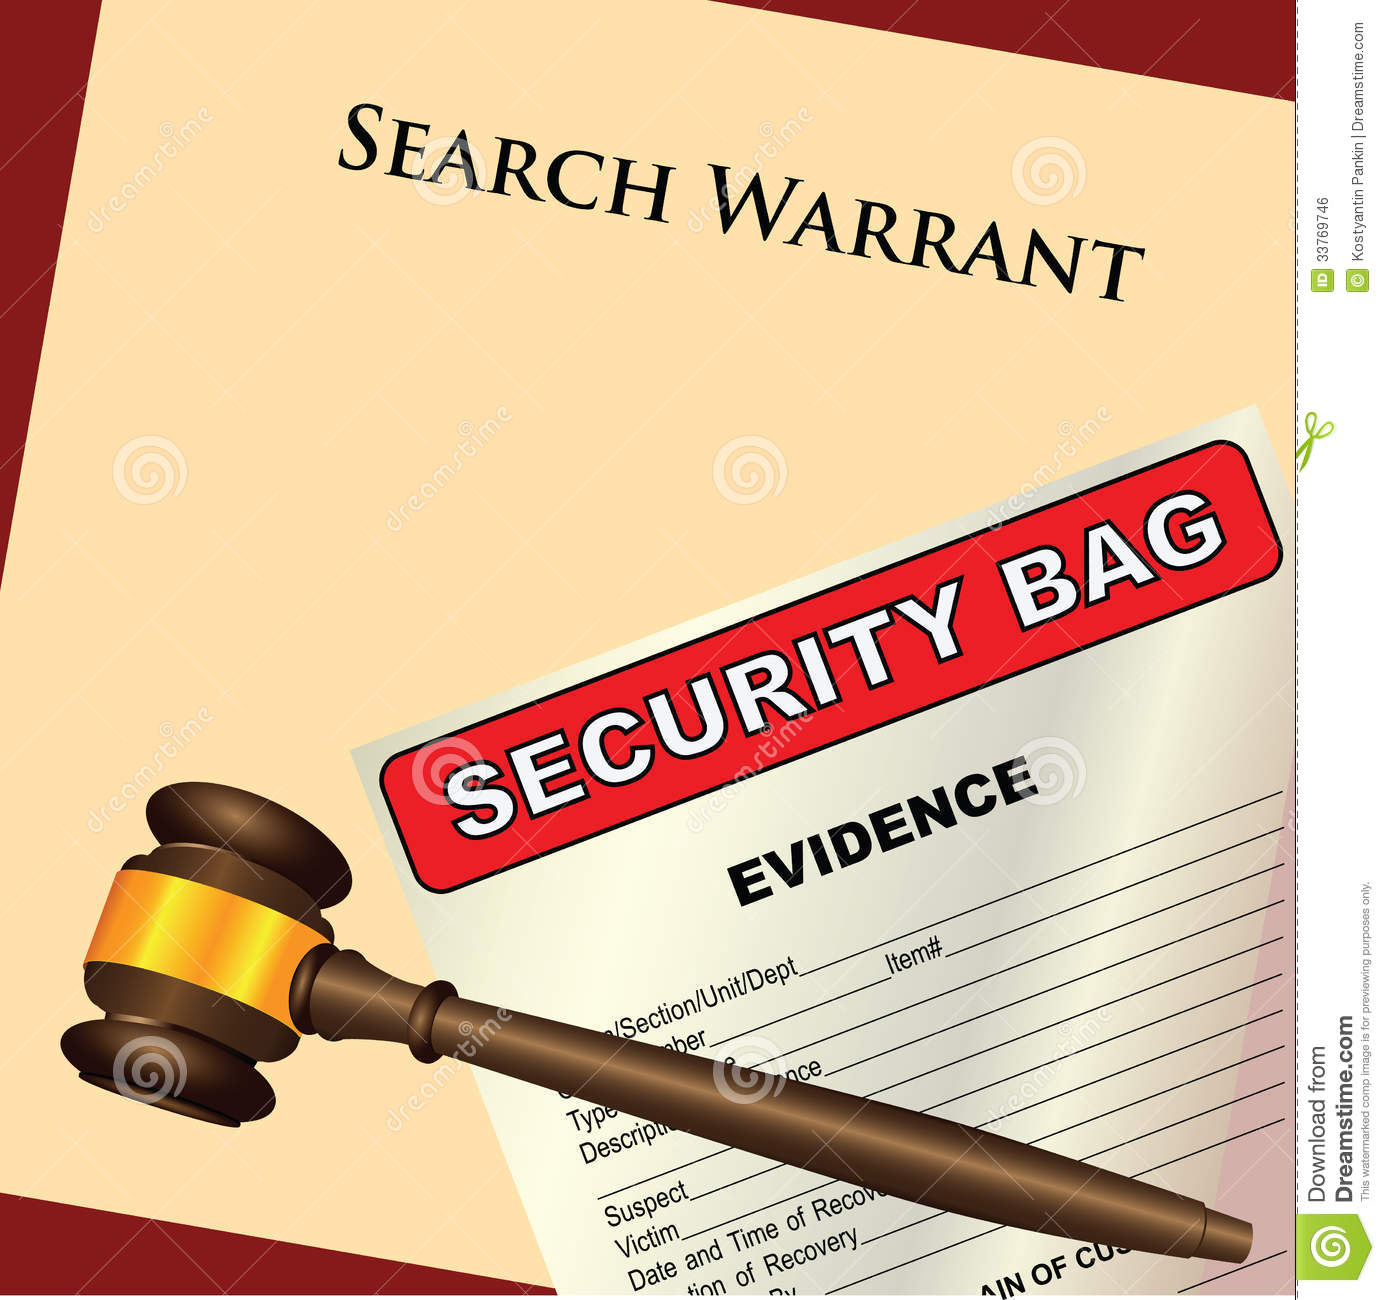 Search Warrant And Evidence Royalty Free Stock Image   Image  33769746